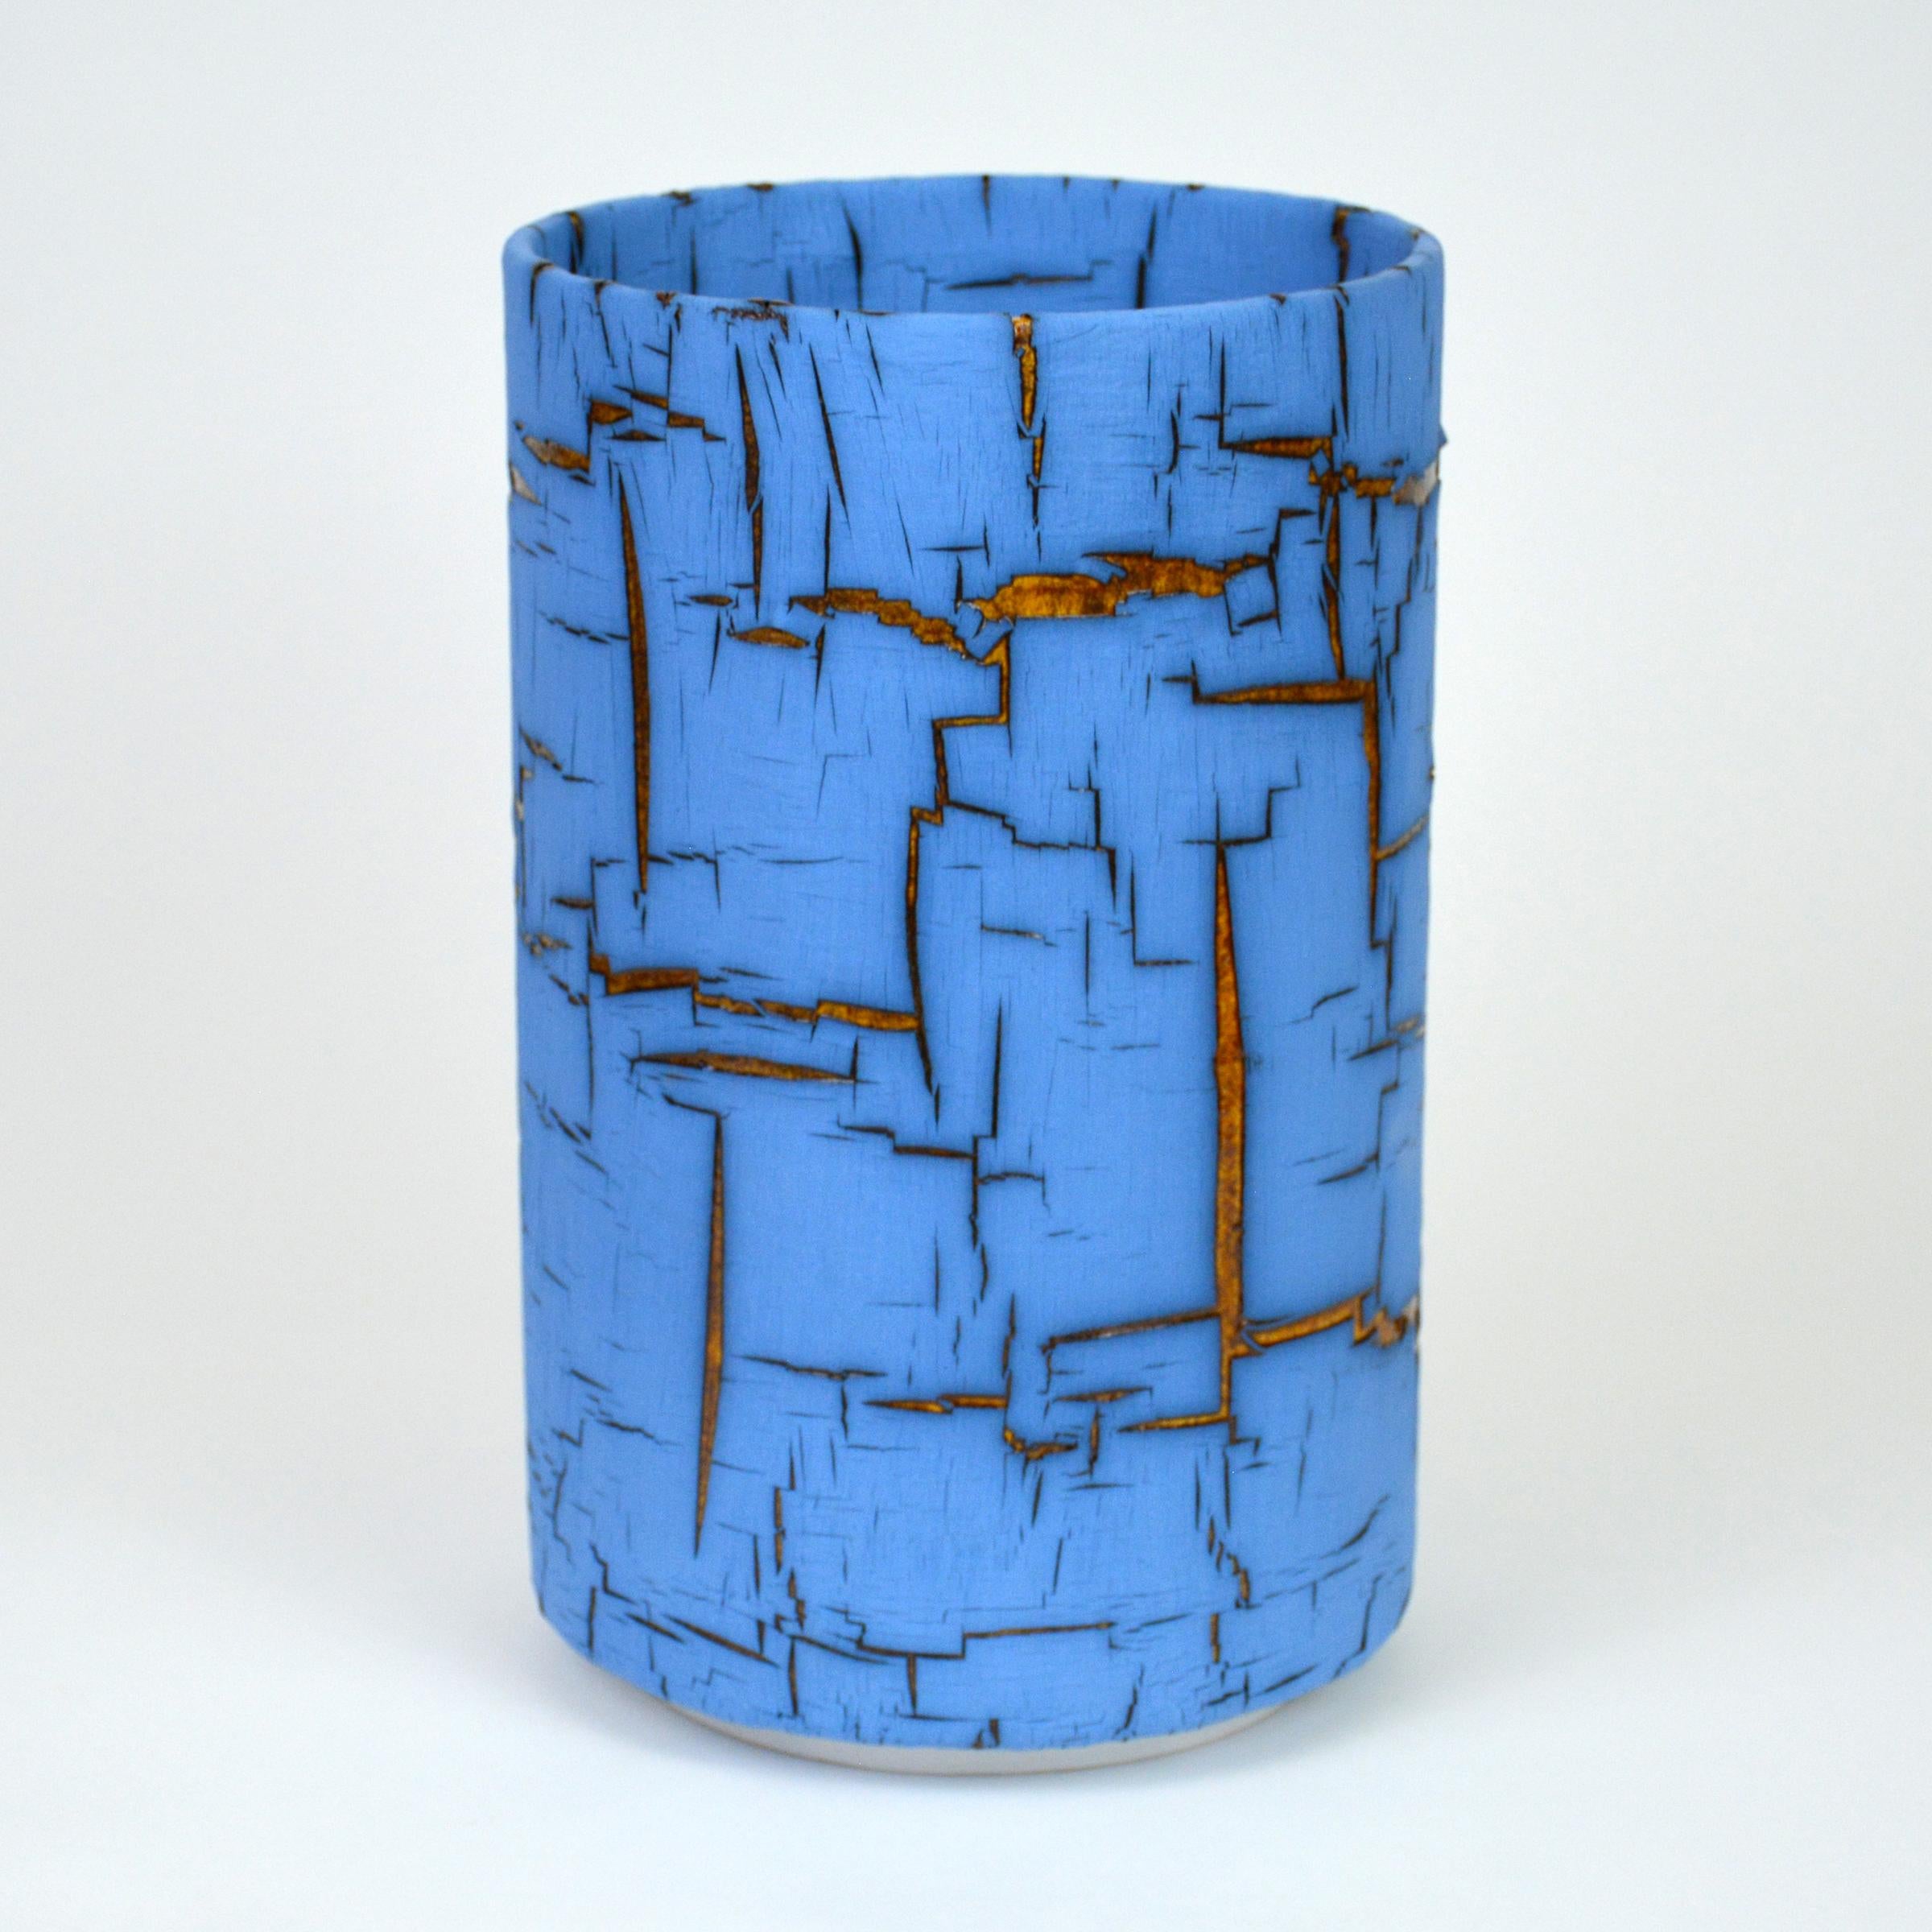 Contemporary Ceramic Vessel  Cylinder Sculpture  by William Edwards  For Sale